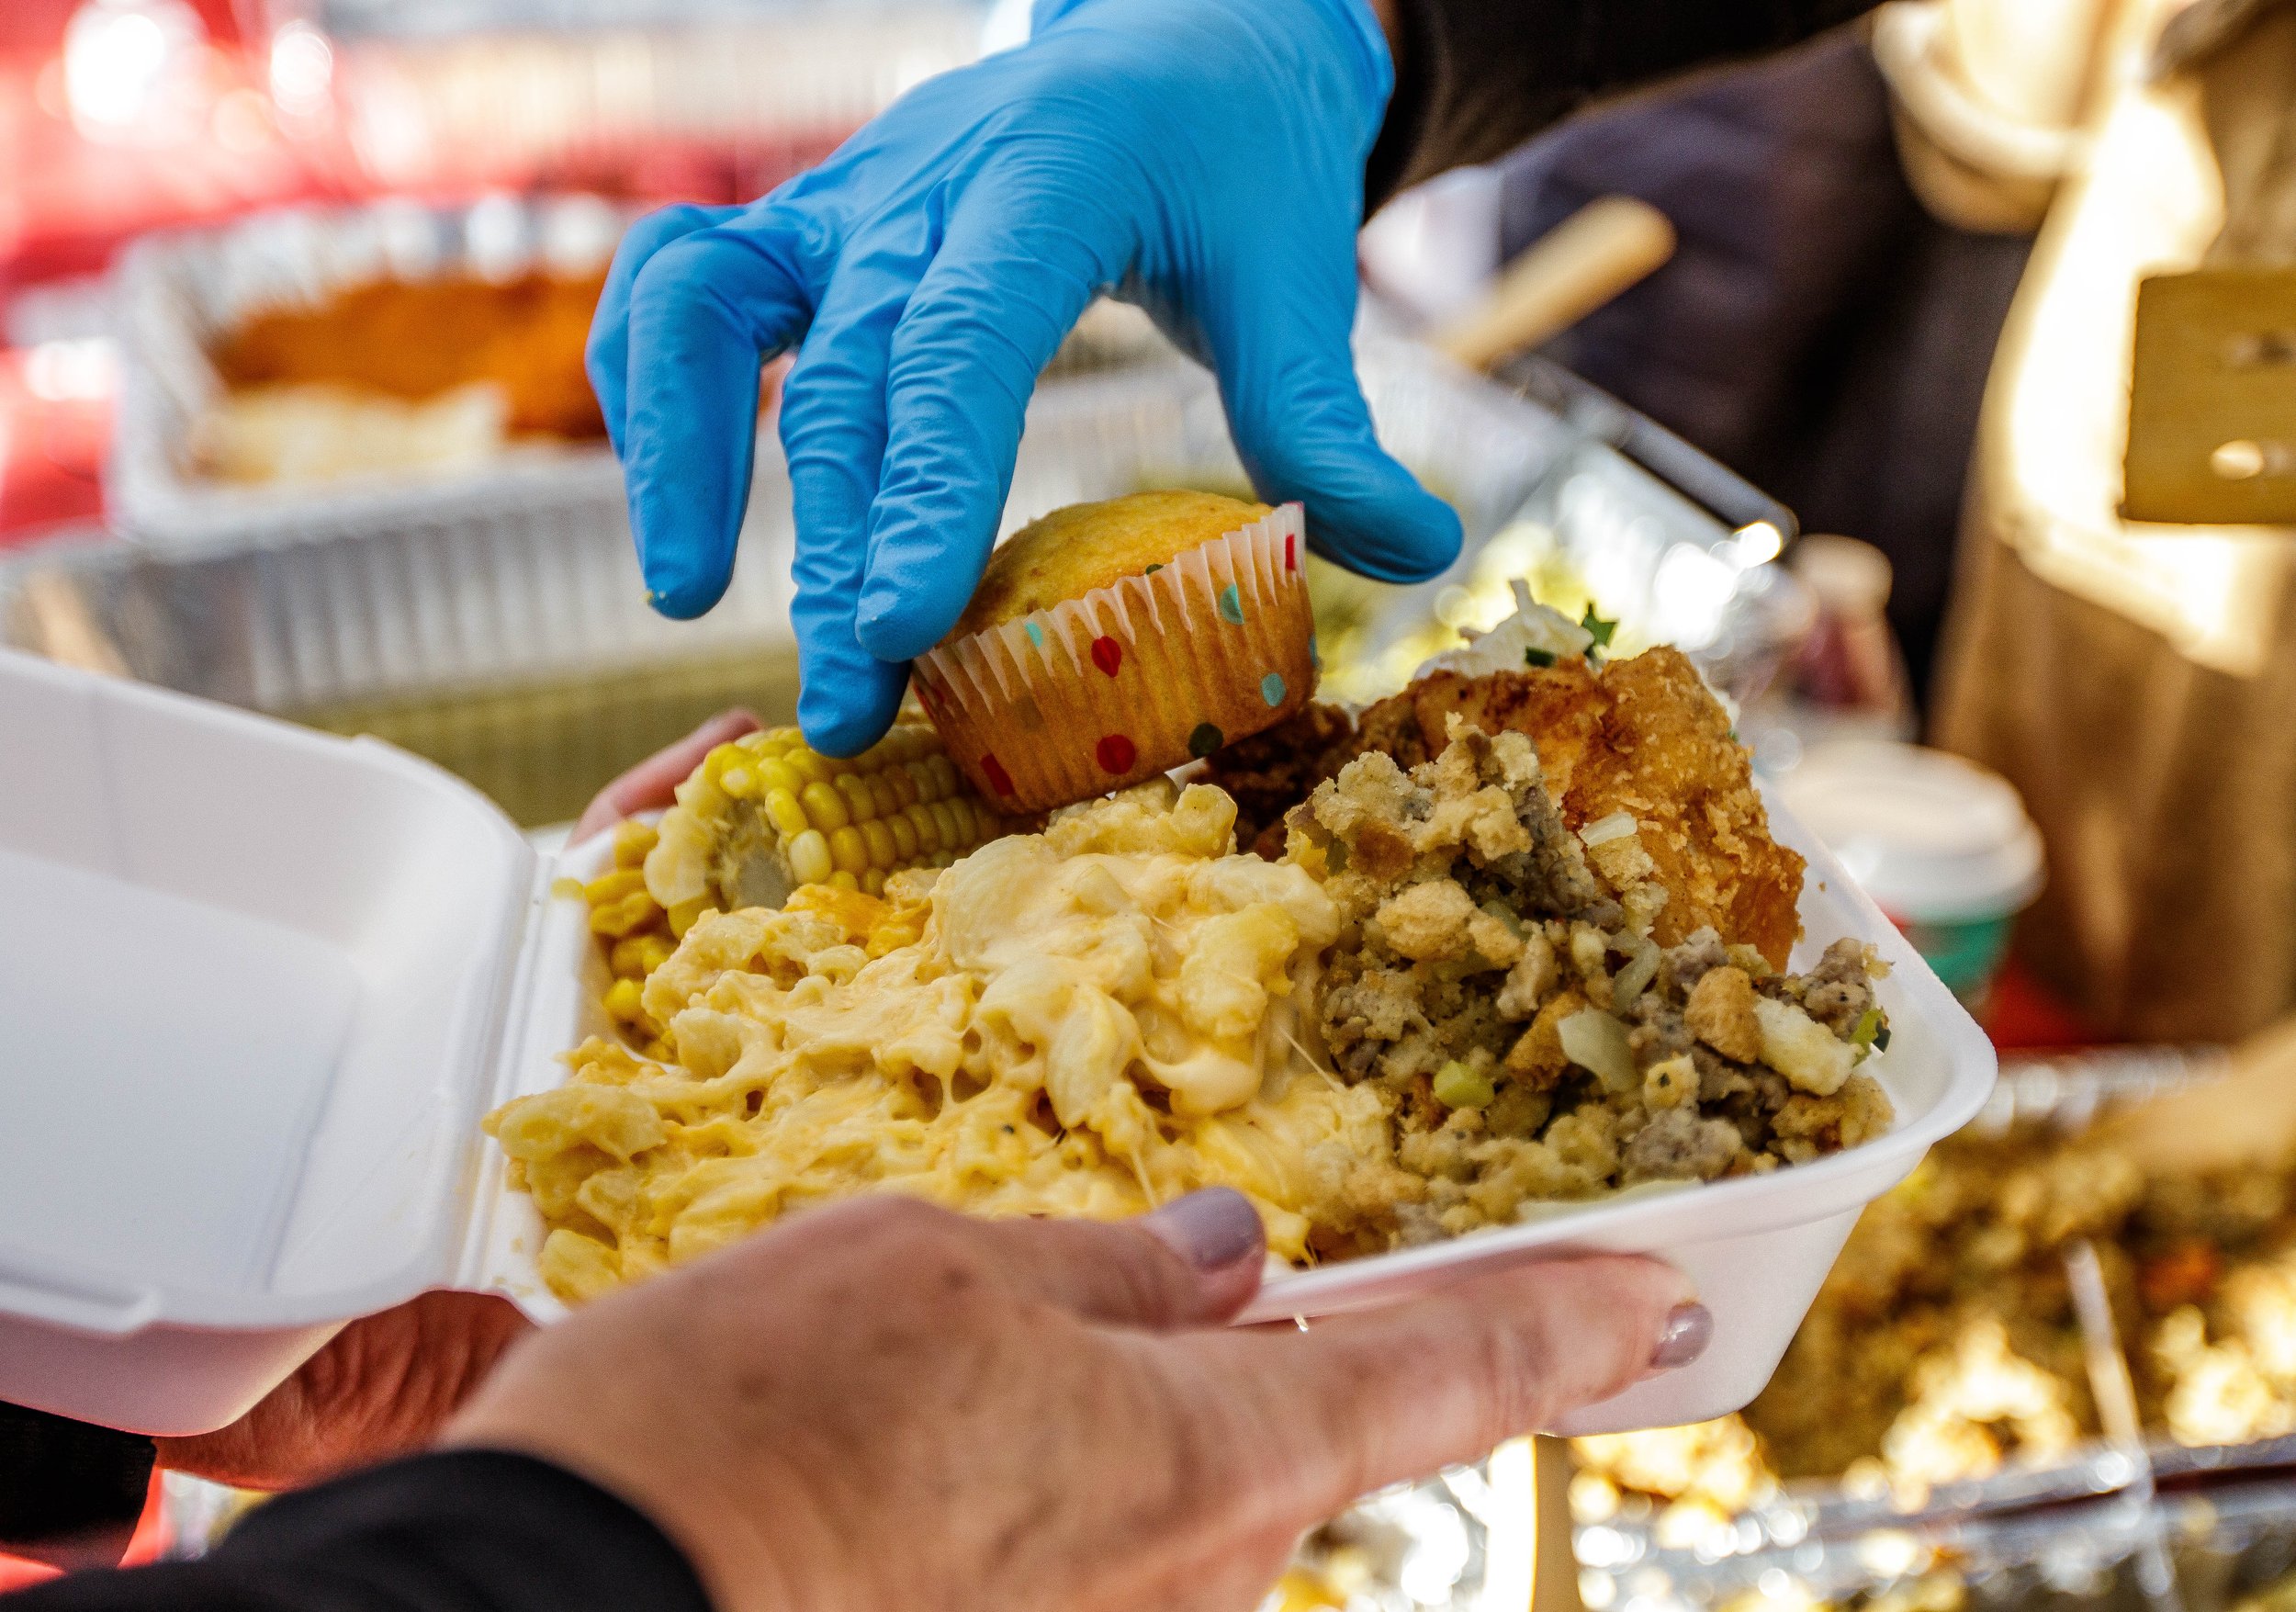  For the past 10 years, Lost Angels Org a non profit based in Los Angeles has been been giving out food and utilities to the homeless in Venice on Thanksgiving Day. All the food is donated and homecooked by the 300+ volunteers. Nov. 24, 2022. Venice,